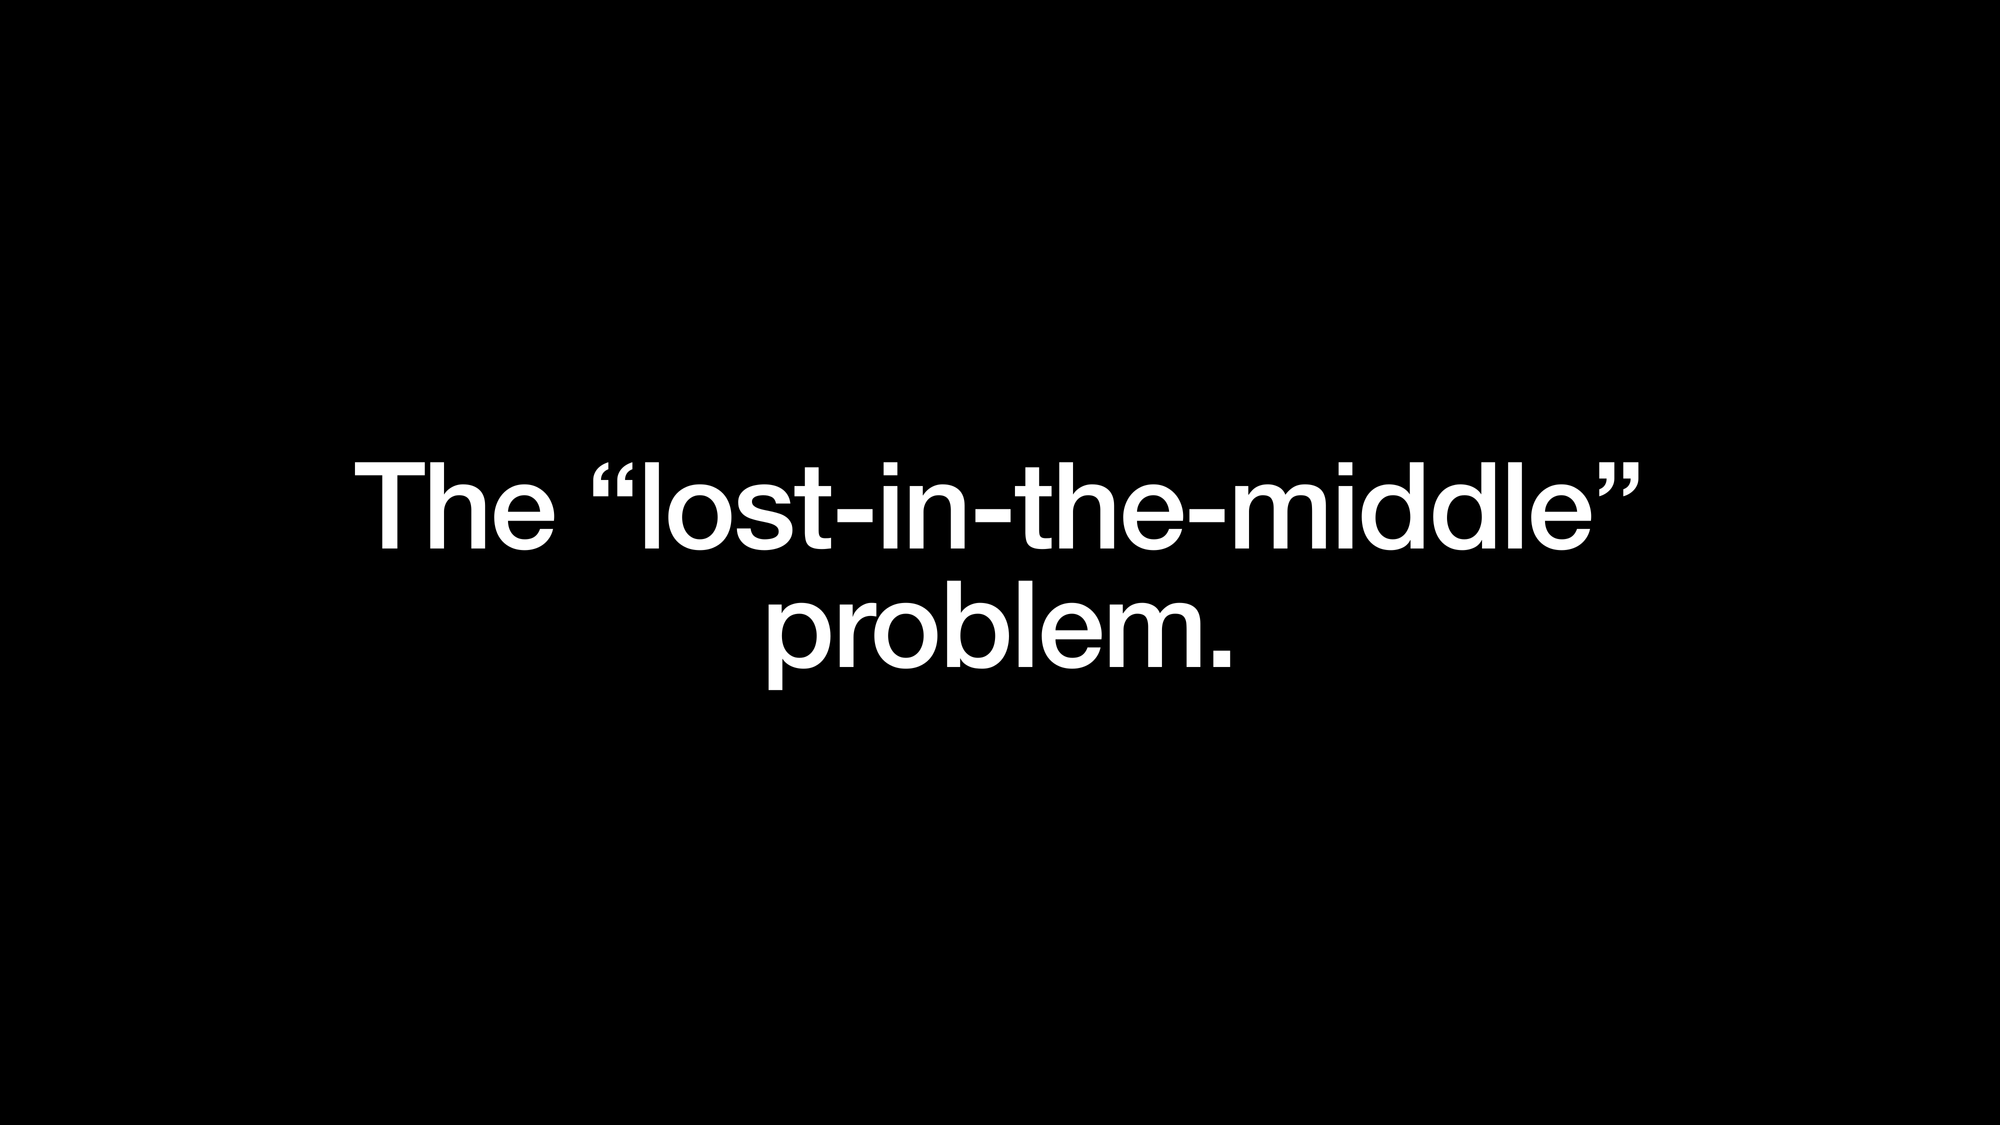 The “lost-in-the-middle” problem.